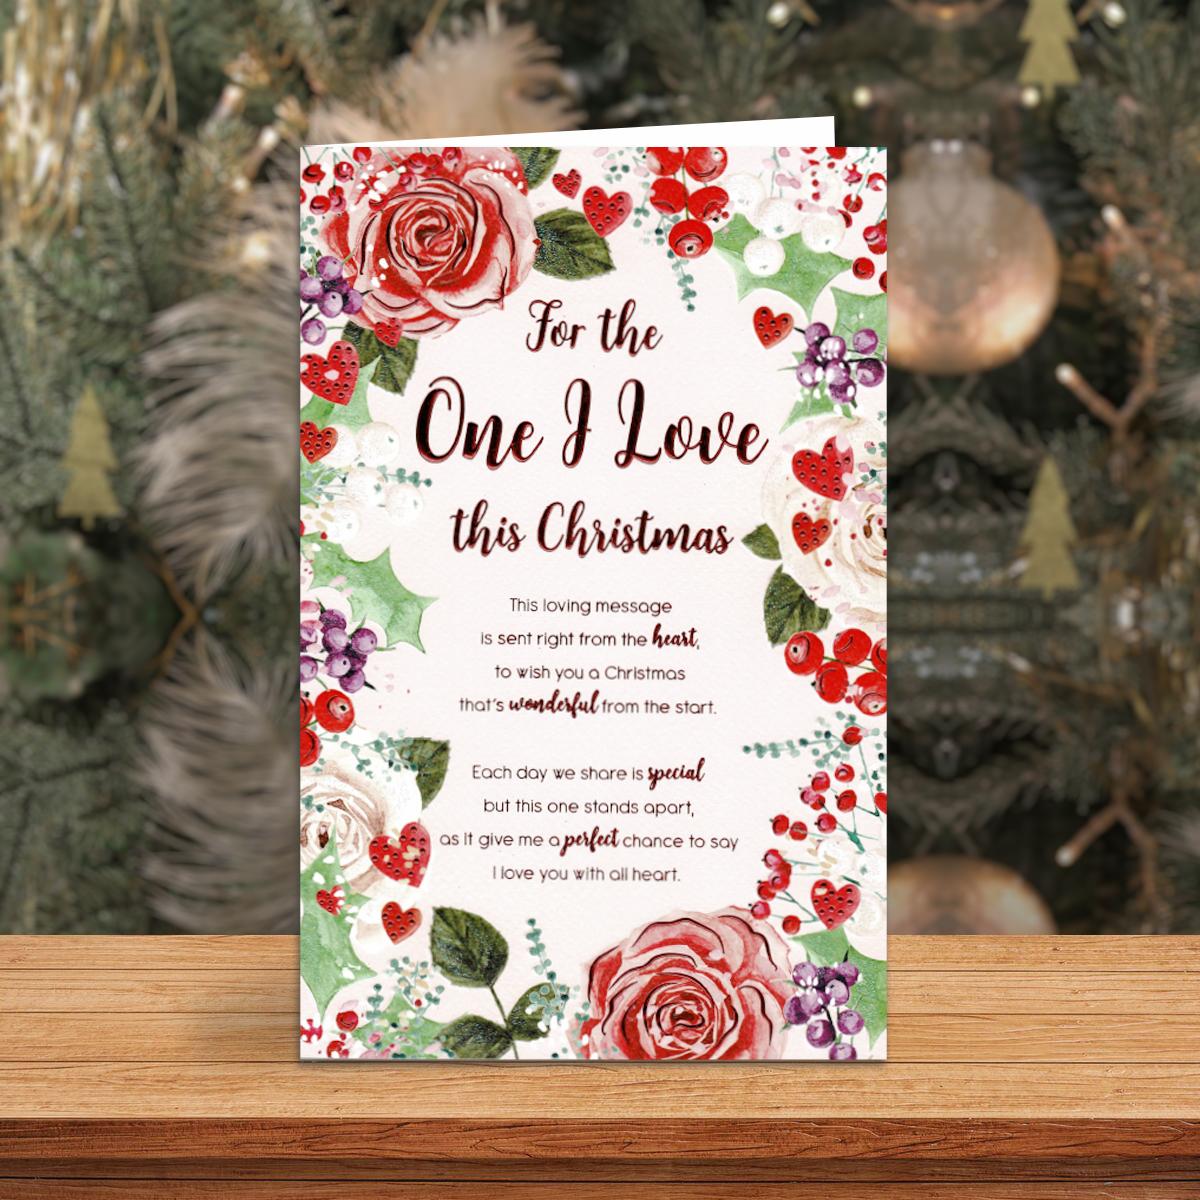 For The One I Love Christmas Card Alongside Its Red Envelope